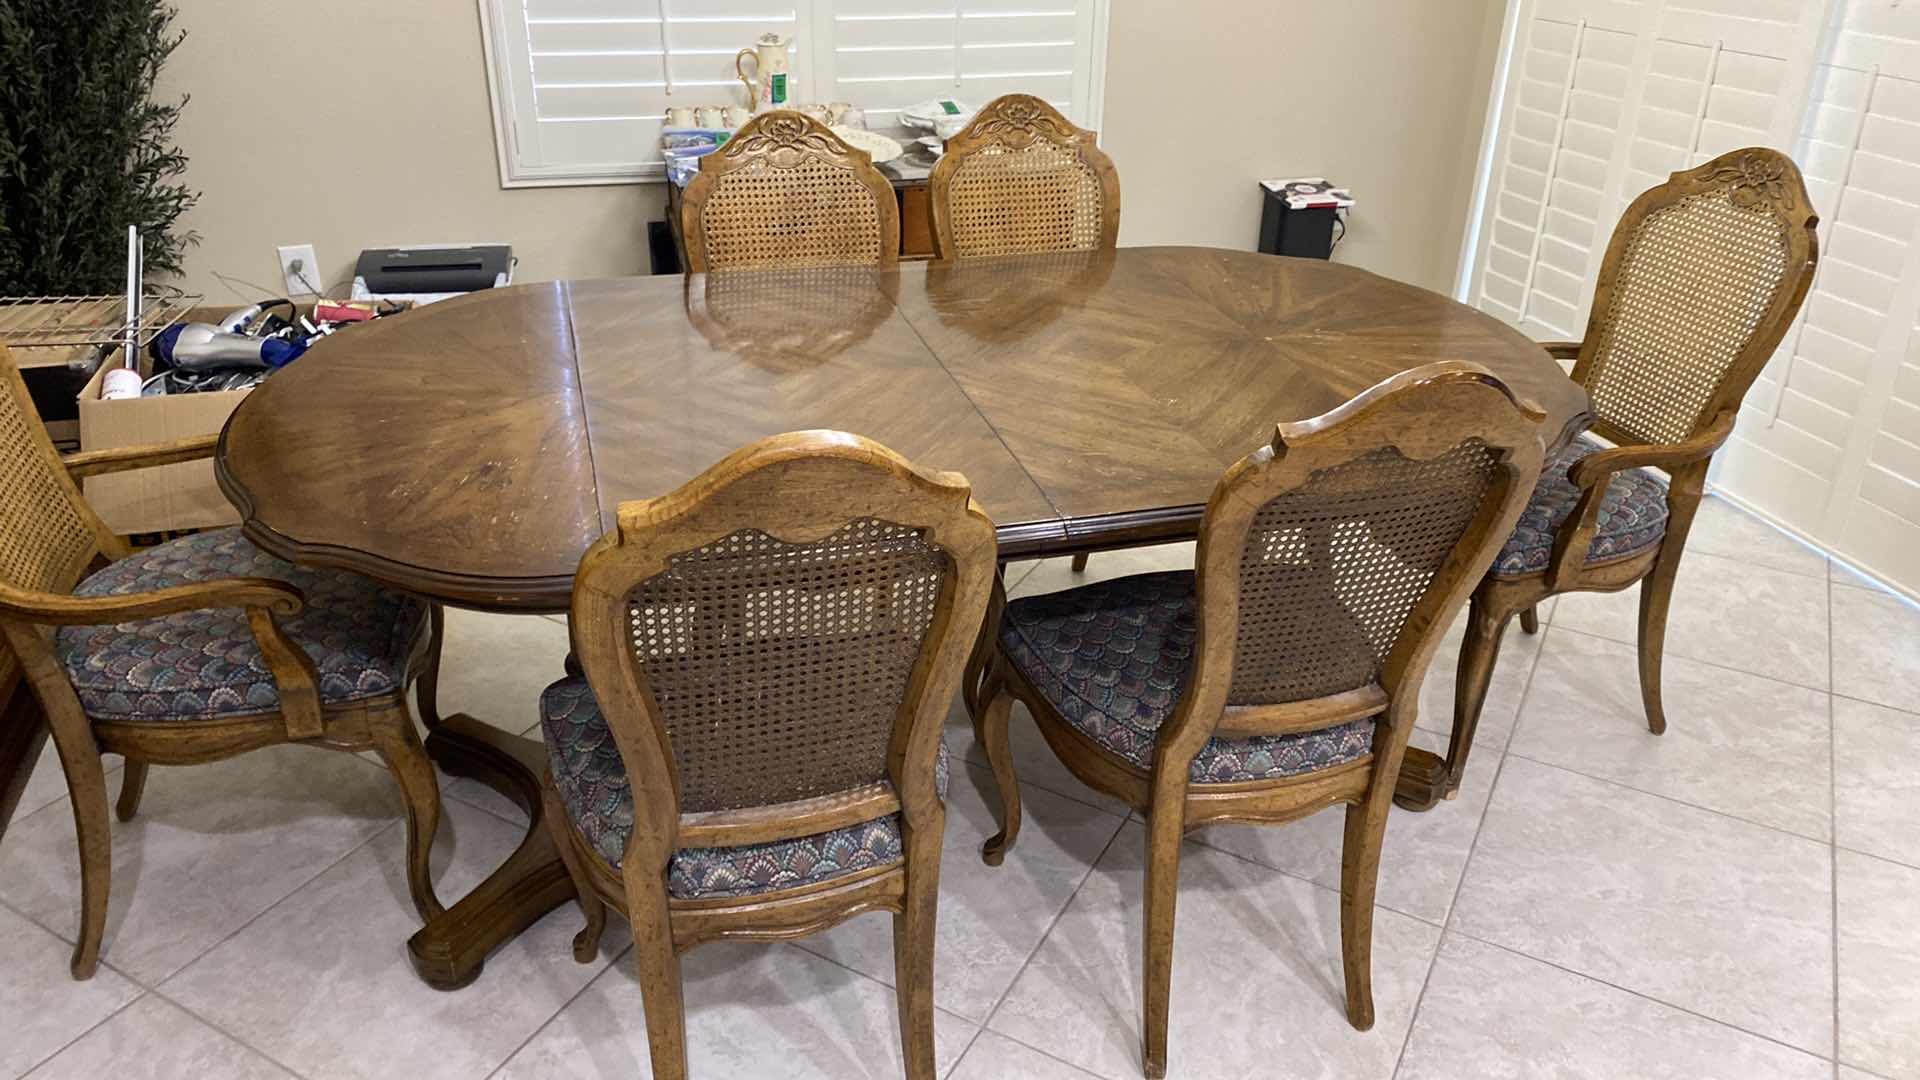 Photo 3 of WOOD DINING TABLE WITH 6 CAN BACK CHAIRS 35” X 42” H29.5” AND 2 LEAFS 20” EACH. TABLE PADS INCLUDED - NEEDS REFINISHING